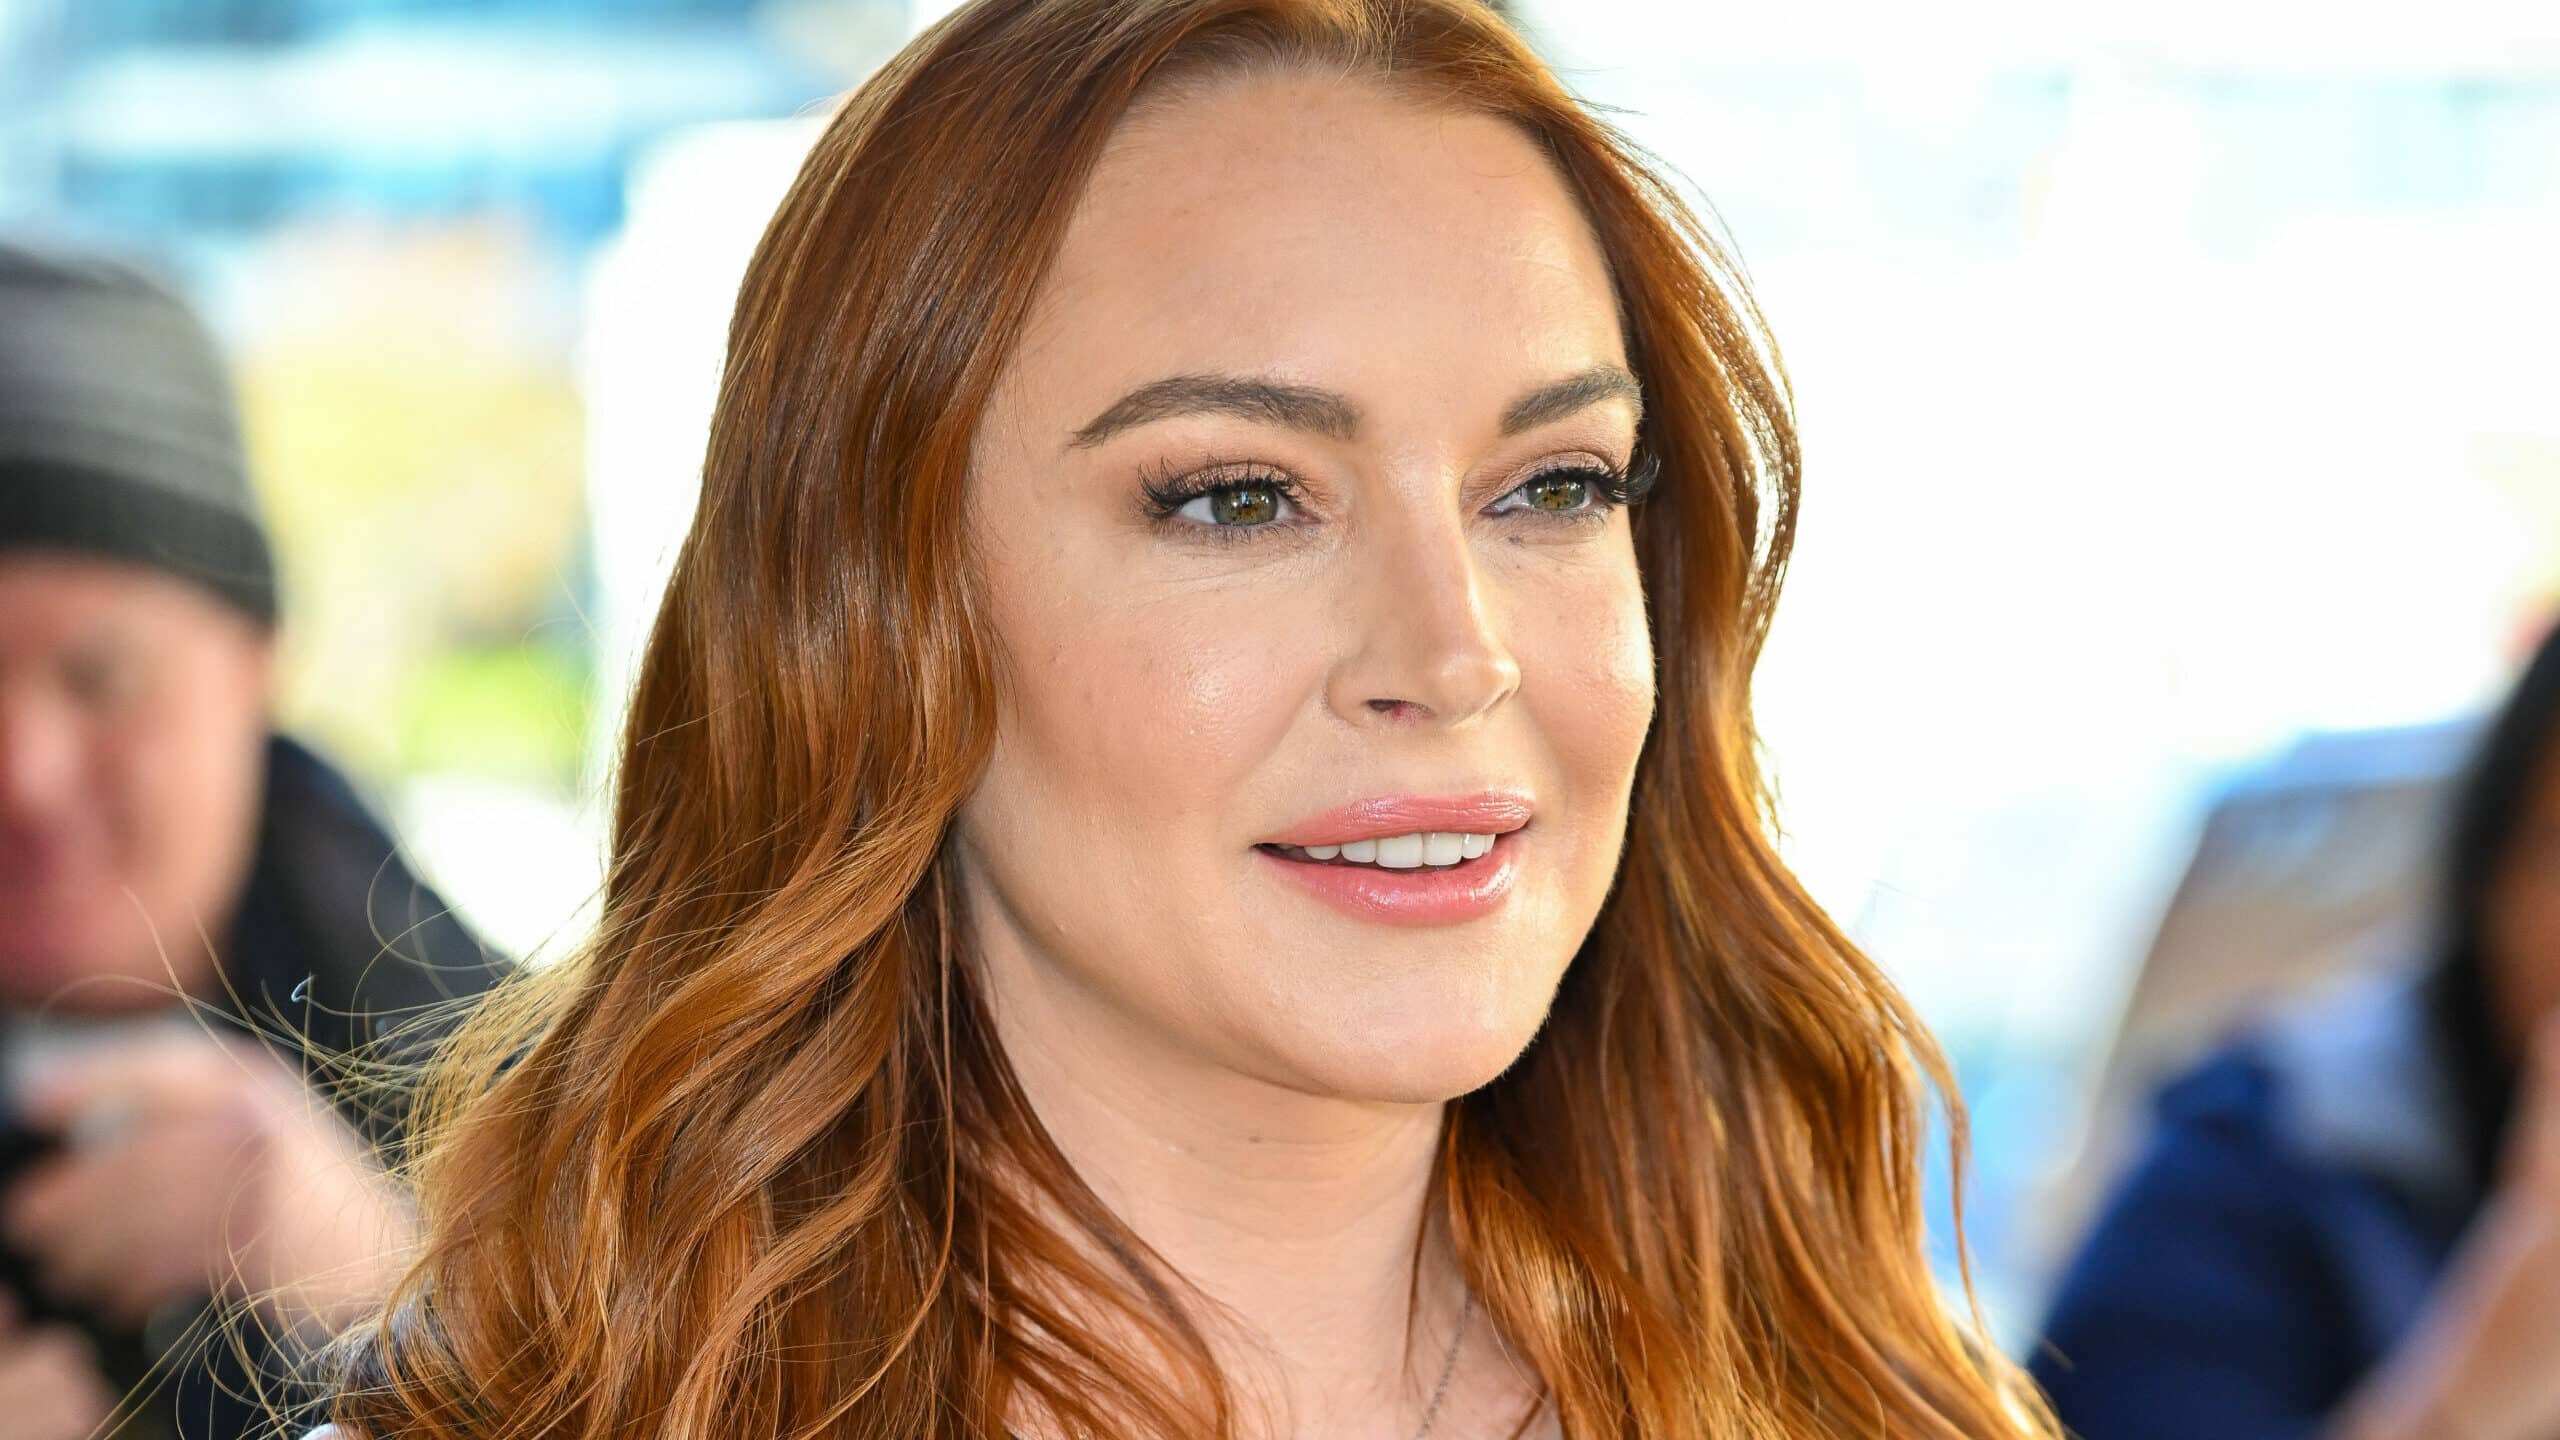 Lohan visits "The Drew Barrymore Show" at CBS Broadcast Center on November 10, 2022 in New York City